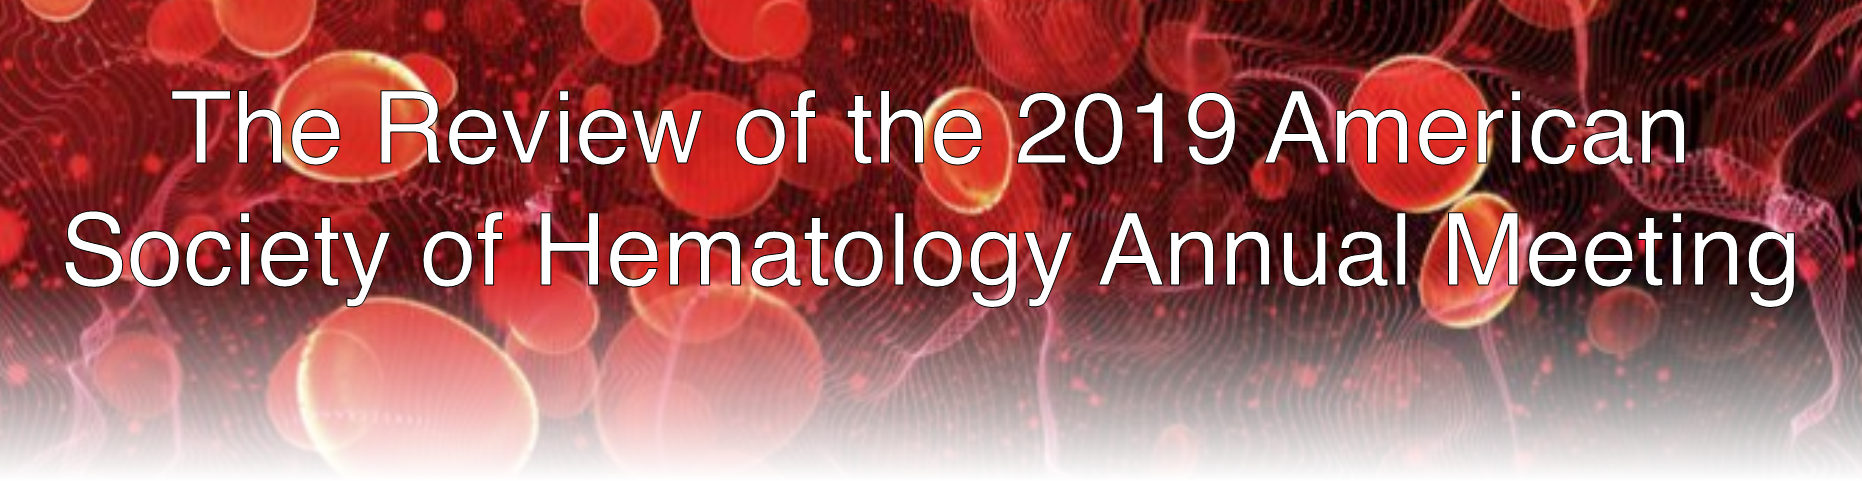 The Review of the 2019 American Society of Hematology Annual Meeting